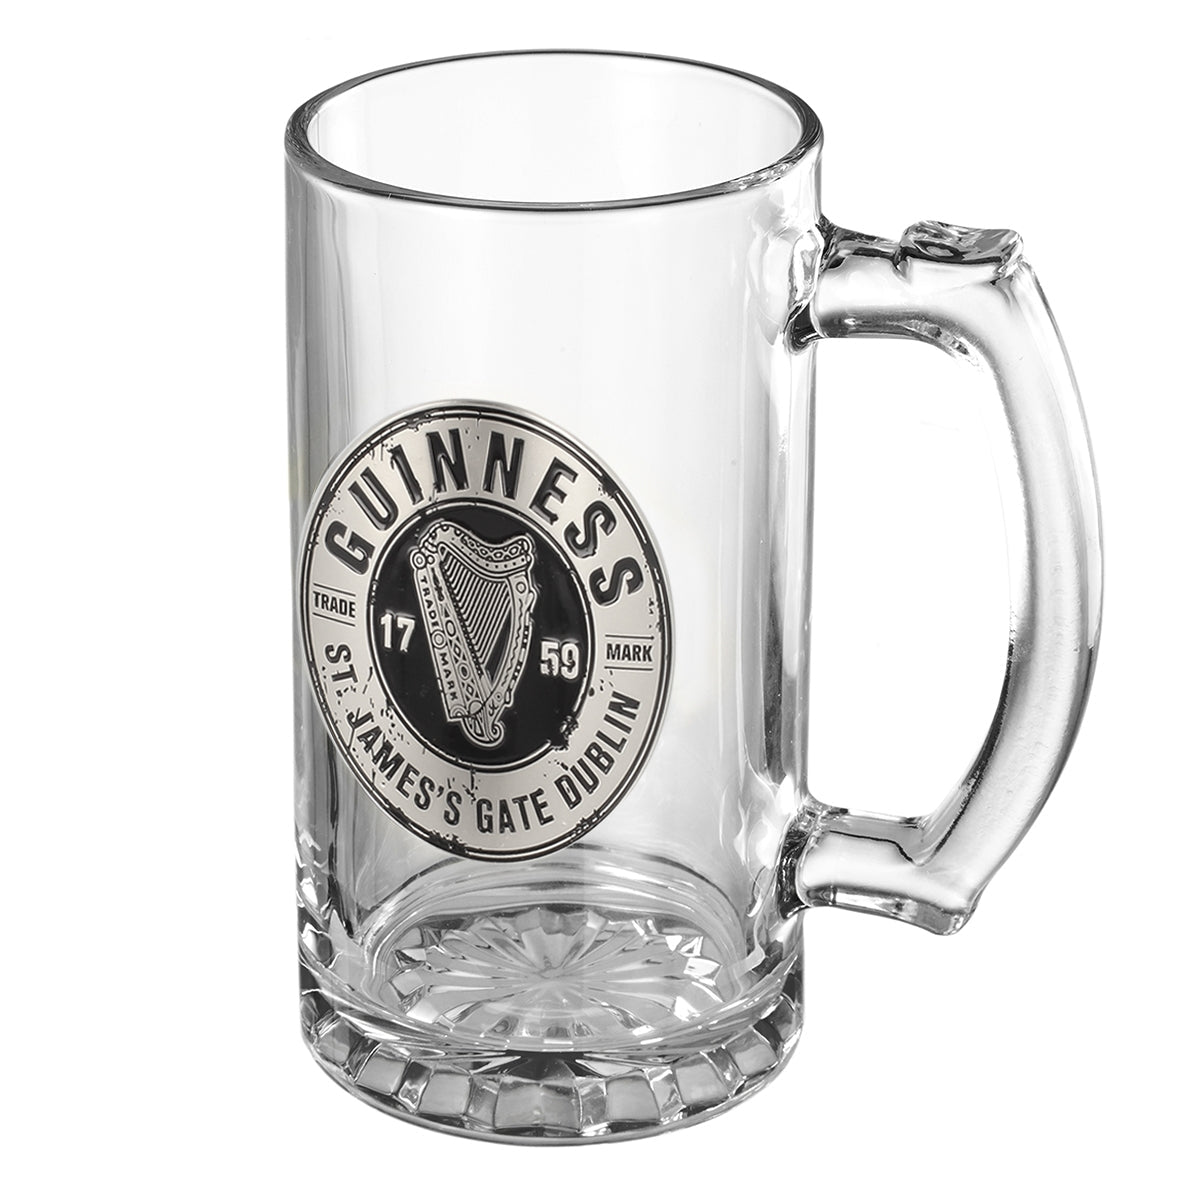 A clear **Guinness Pewter Logo Tankard** featuring the Guinness logo and “St. James's Gate Dublin” text. The **Guinness** tankard, part of the exclusive beer glass collection, has a sturdy handle and a thick base with ornamental detailing.